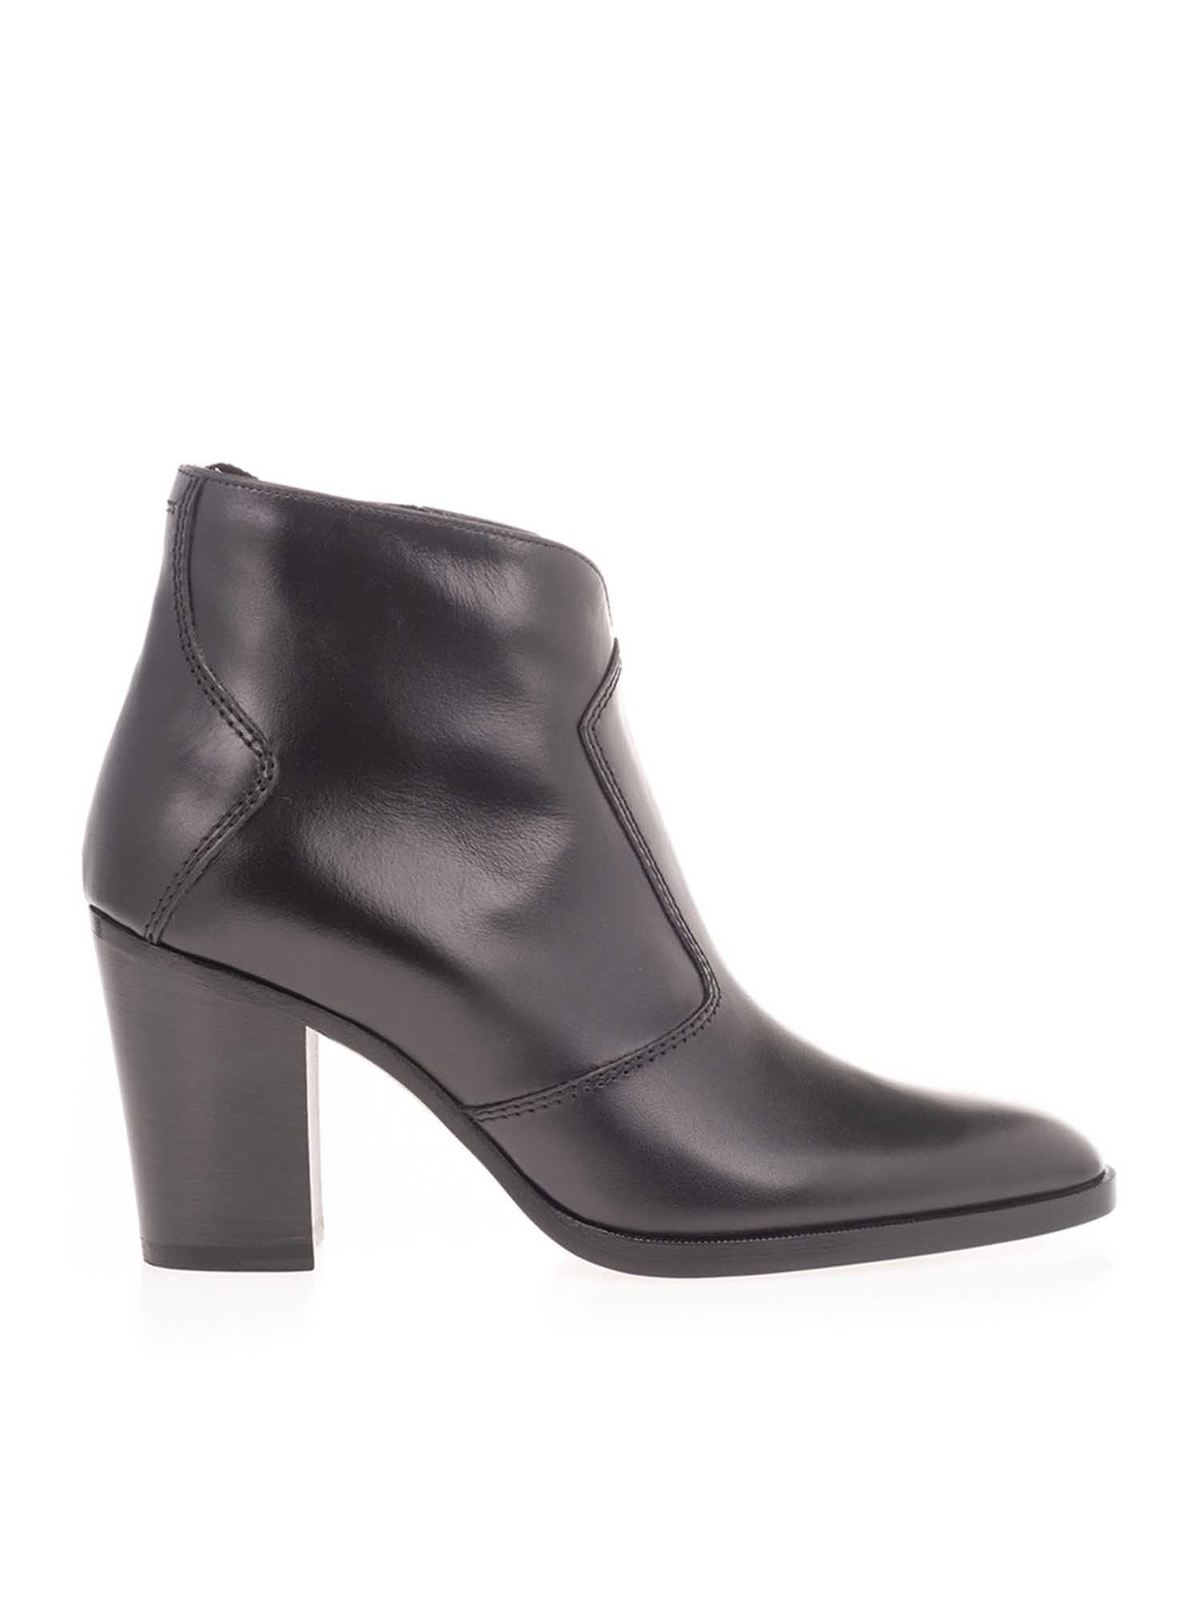 Céline - Black ankle boots with heel 